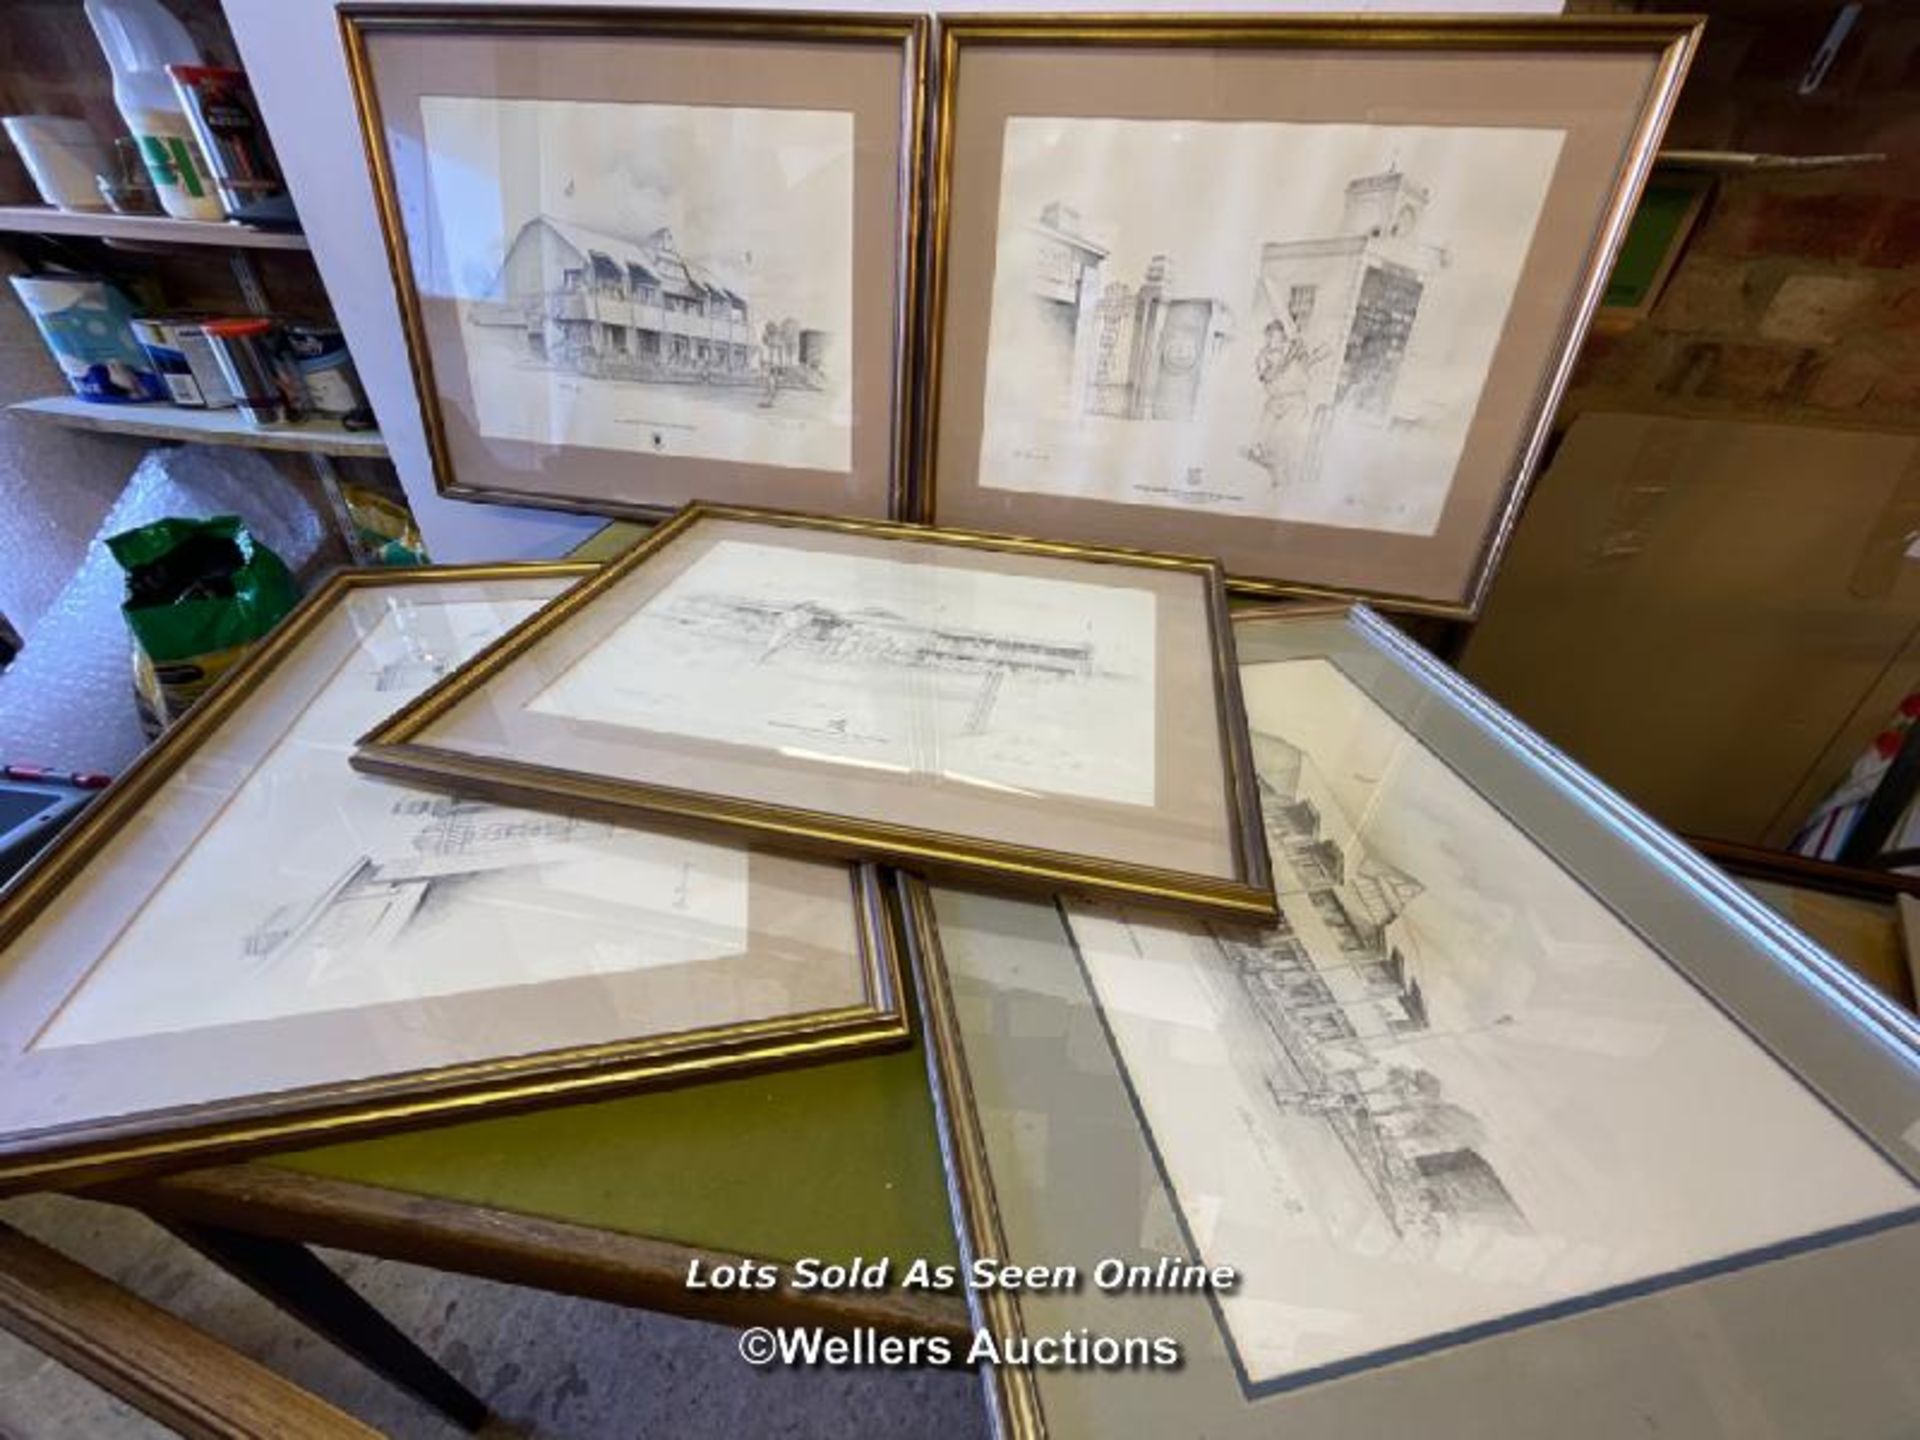 FIVE FRAMED AND GLAZED PRINTS OF CRICKET GROUNDS, INCLUDING TAUNTON, SUSSEX AND UXBRIDGE. THE